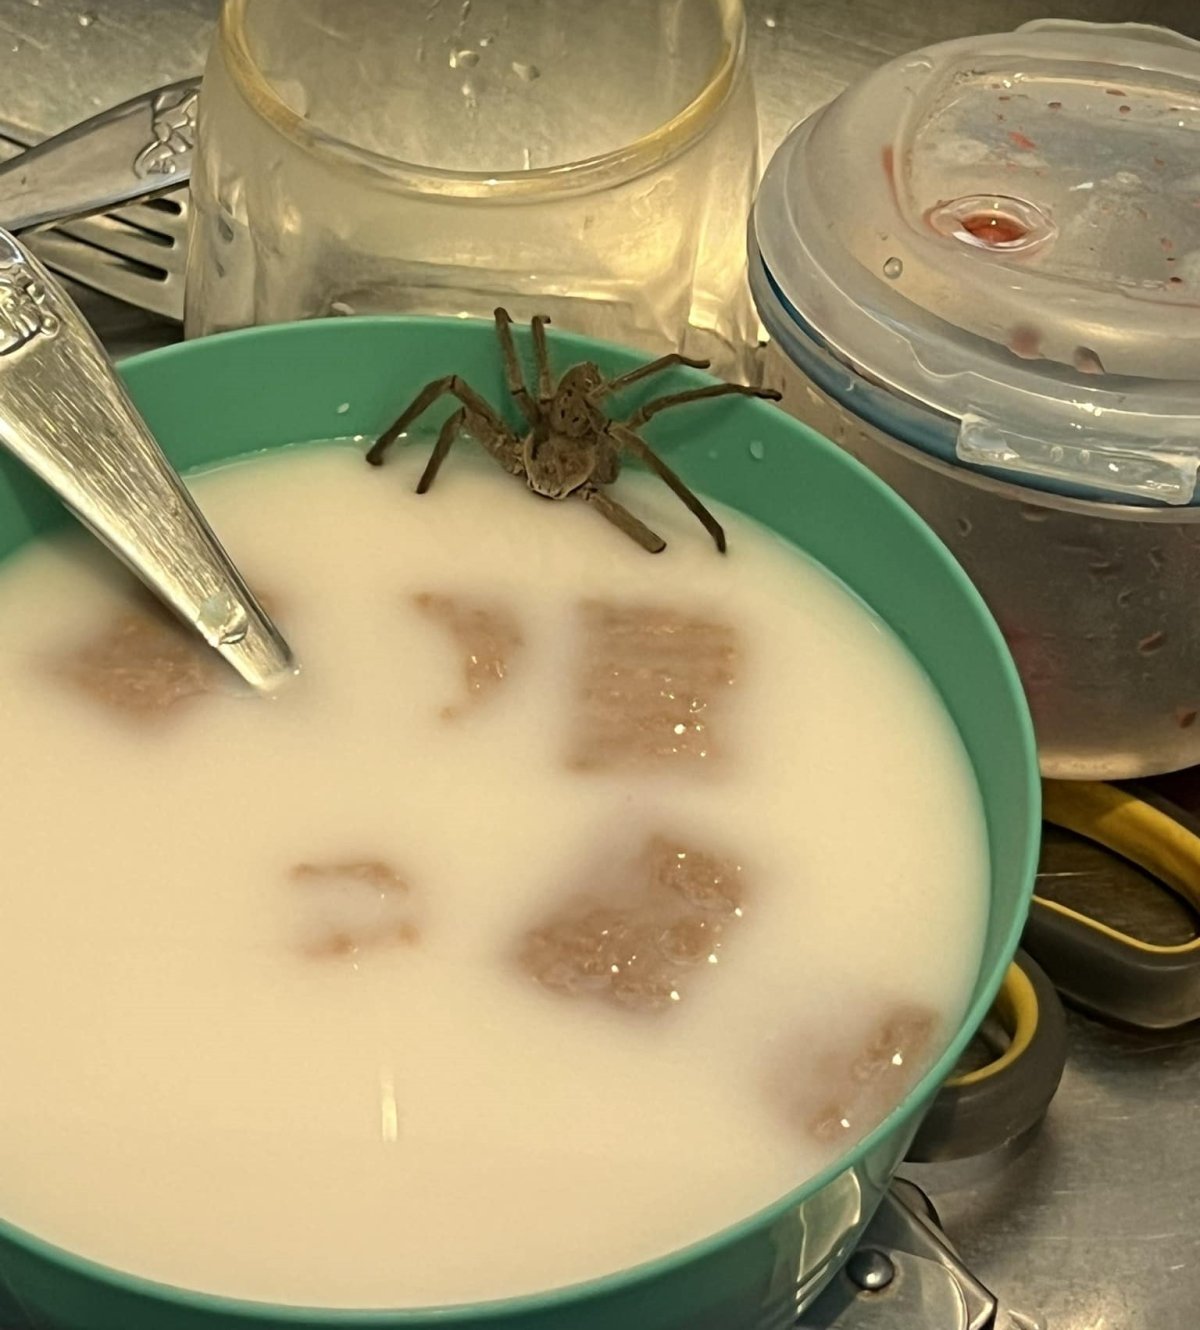 Spider in cereal